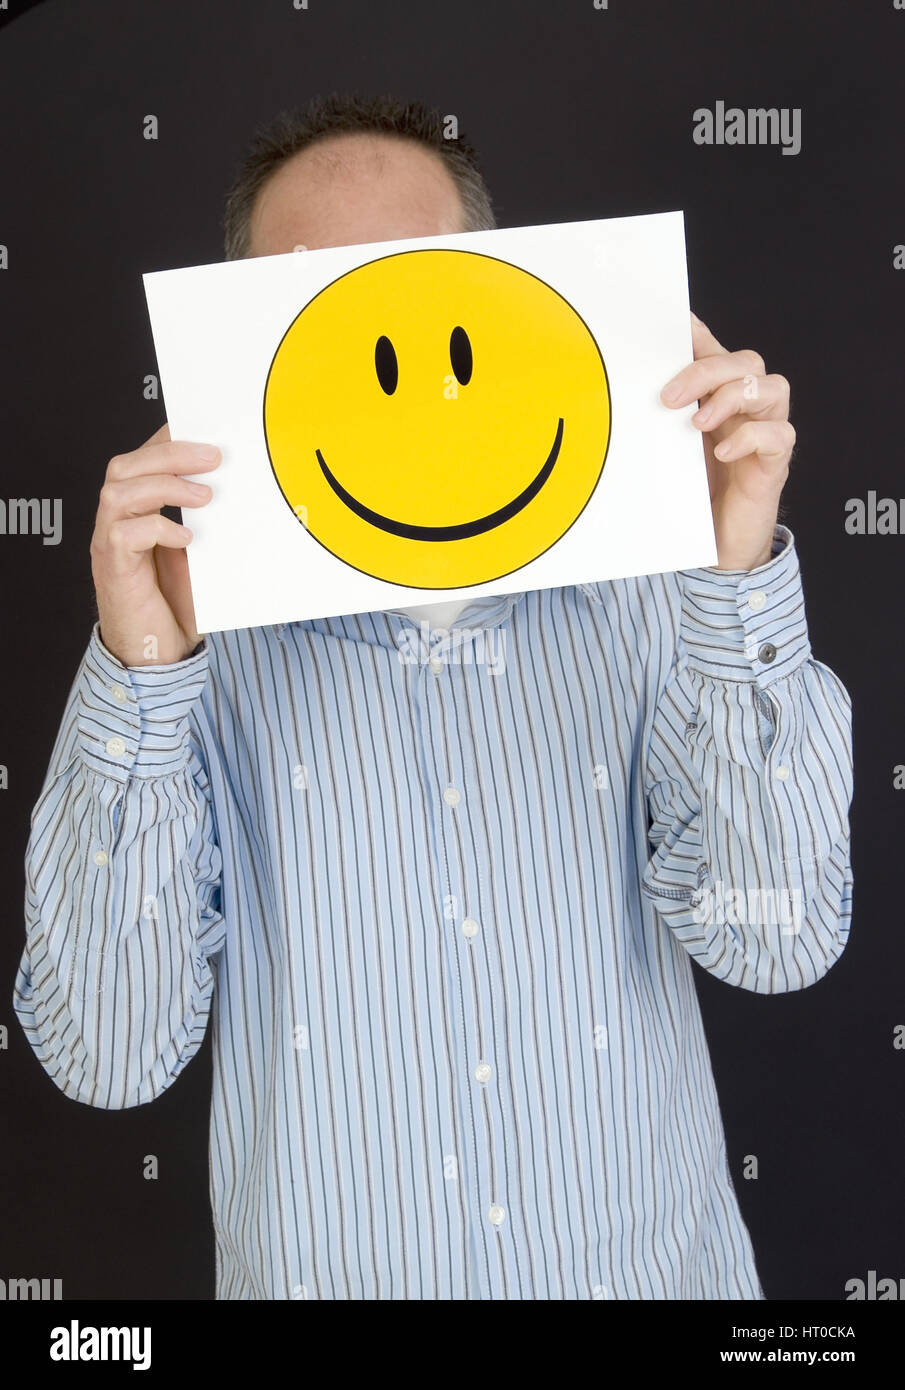 Mann mit lachendem Smileygesicht - man with laughing smiley face Stock Photo